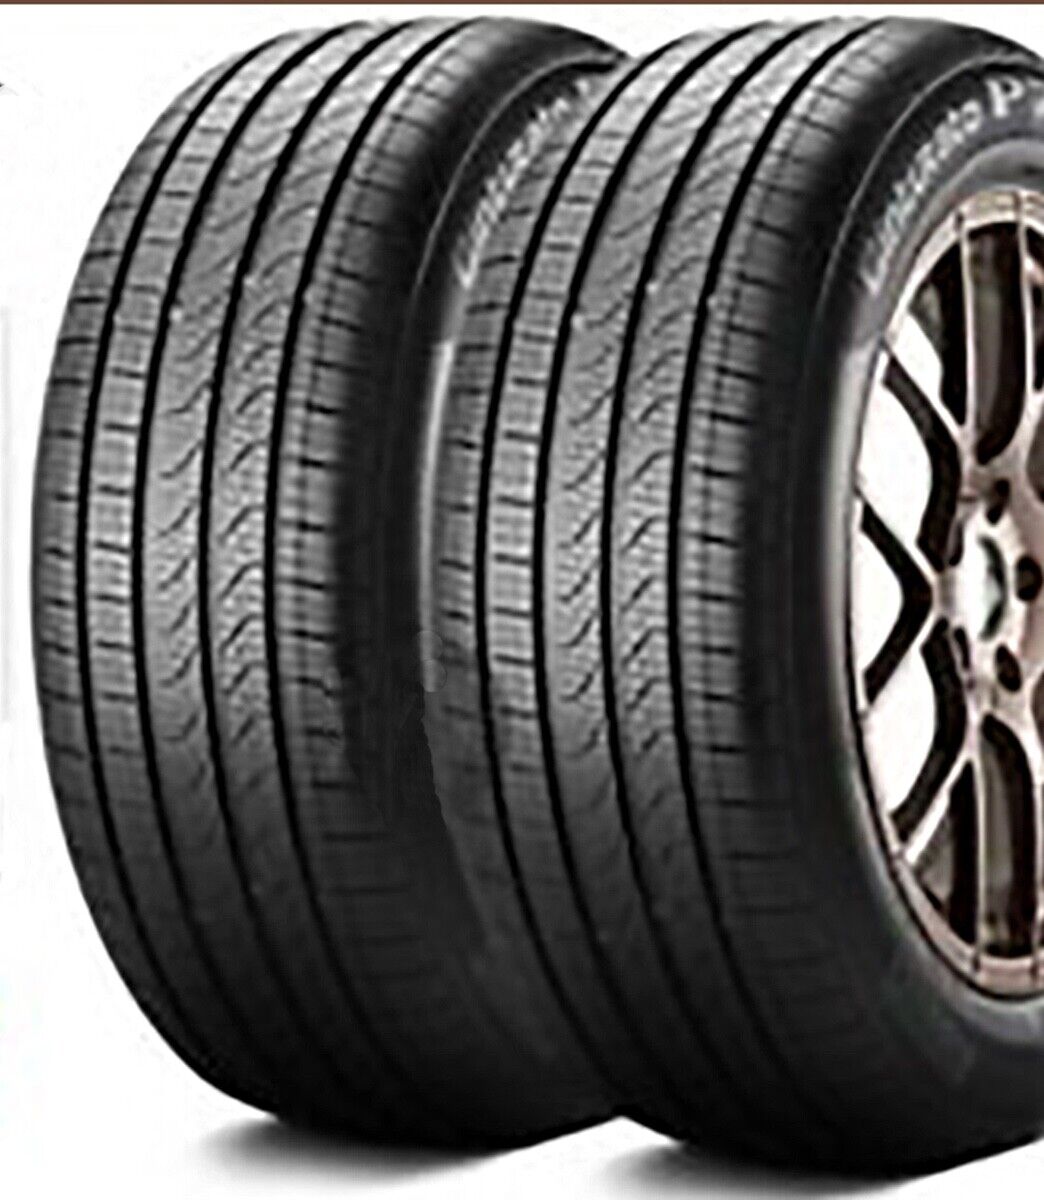 Pirelli P7AS275/35R19 XL Run-Flat…PRICE IS FOR TWO TIRES